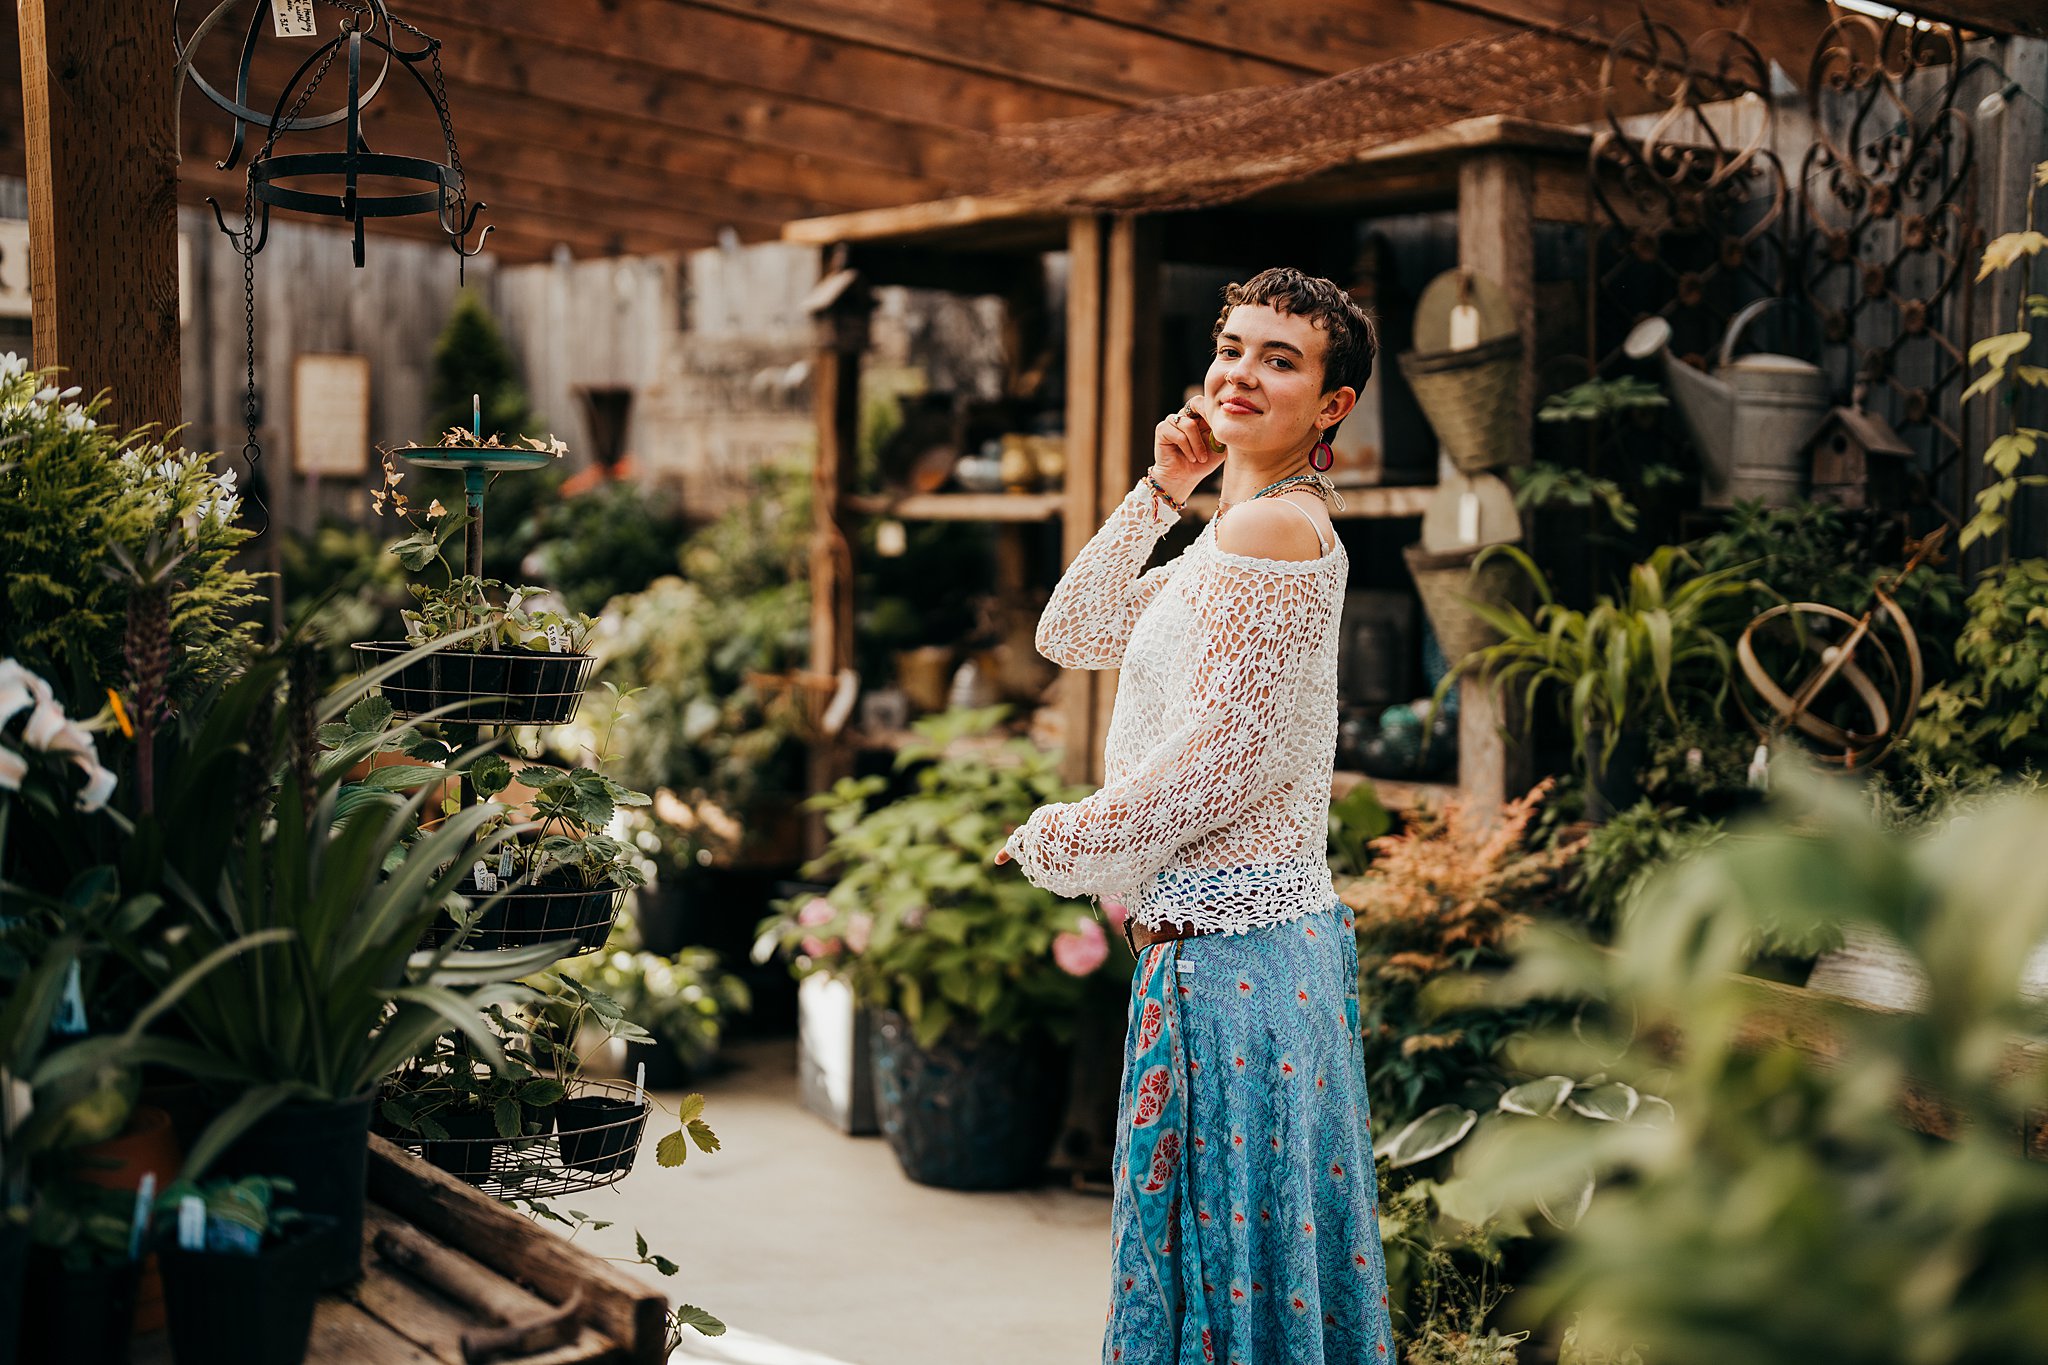 A woman in a blue skirt stands inside a garden shed with a hand on her cheek